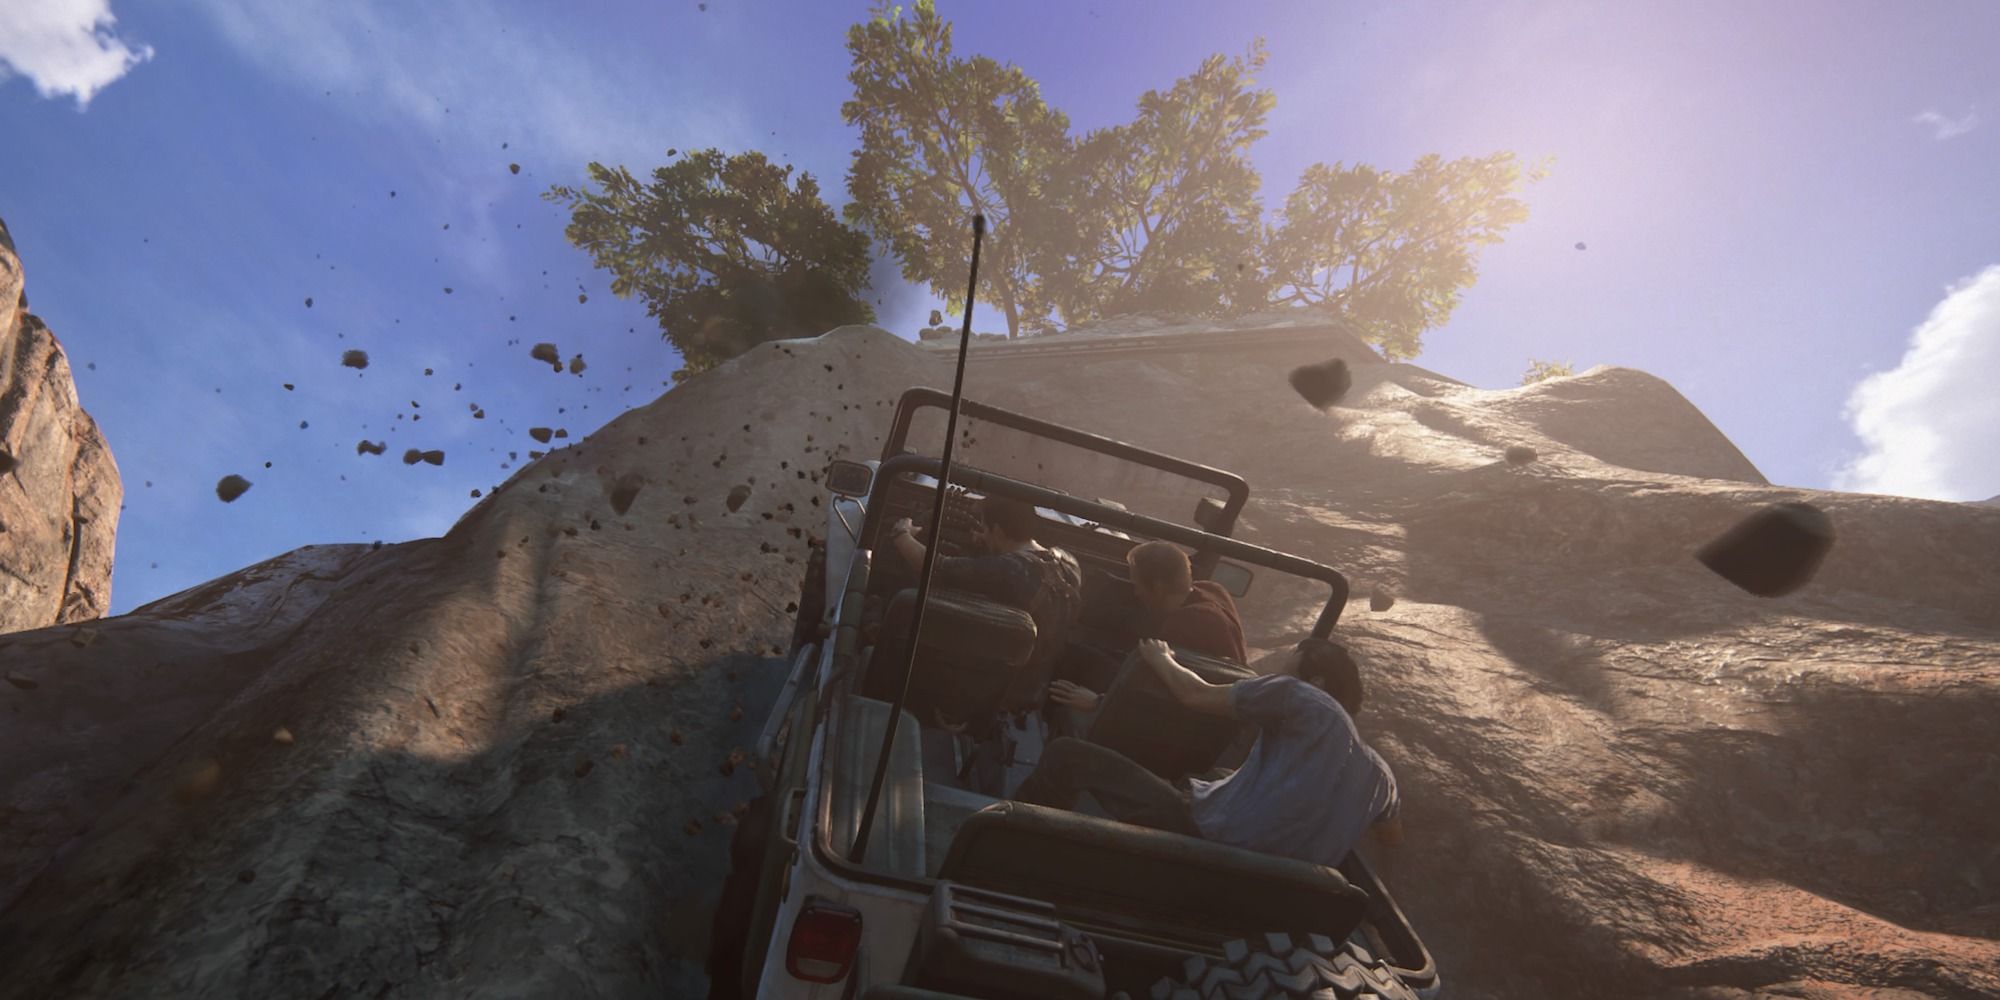 uncharted 4 jeep falling